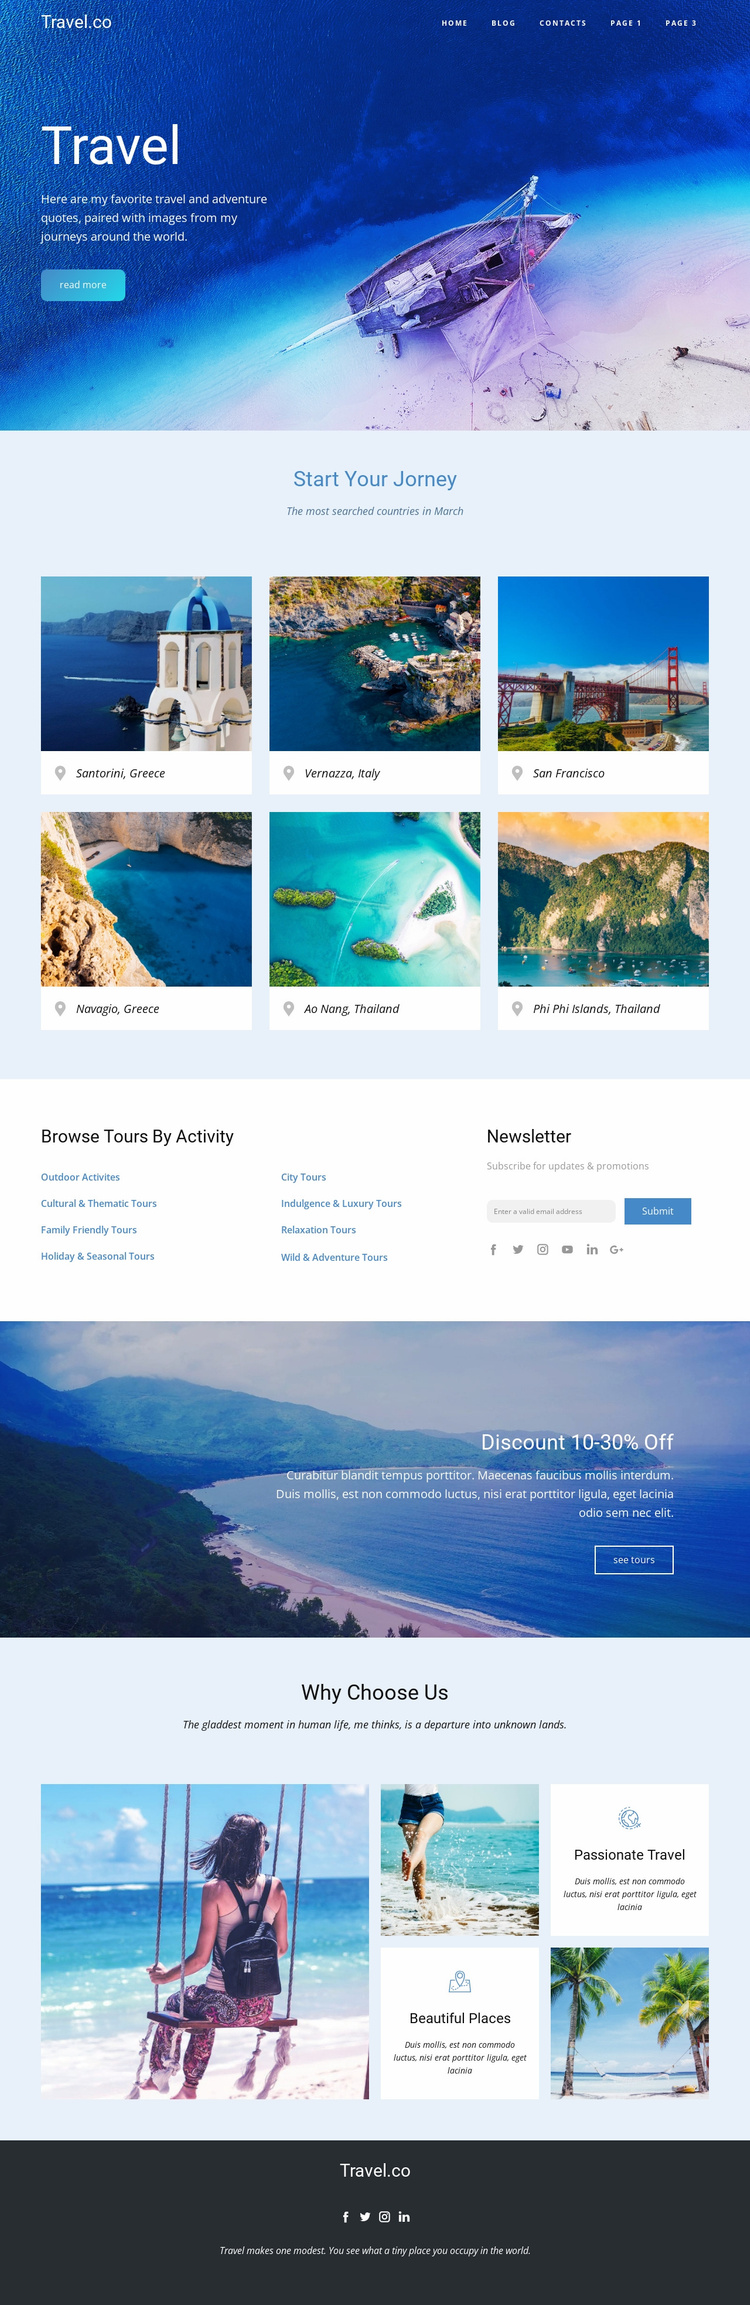 Amazing ideas for travel Website Template